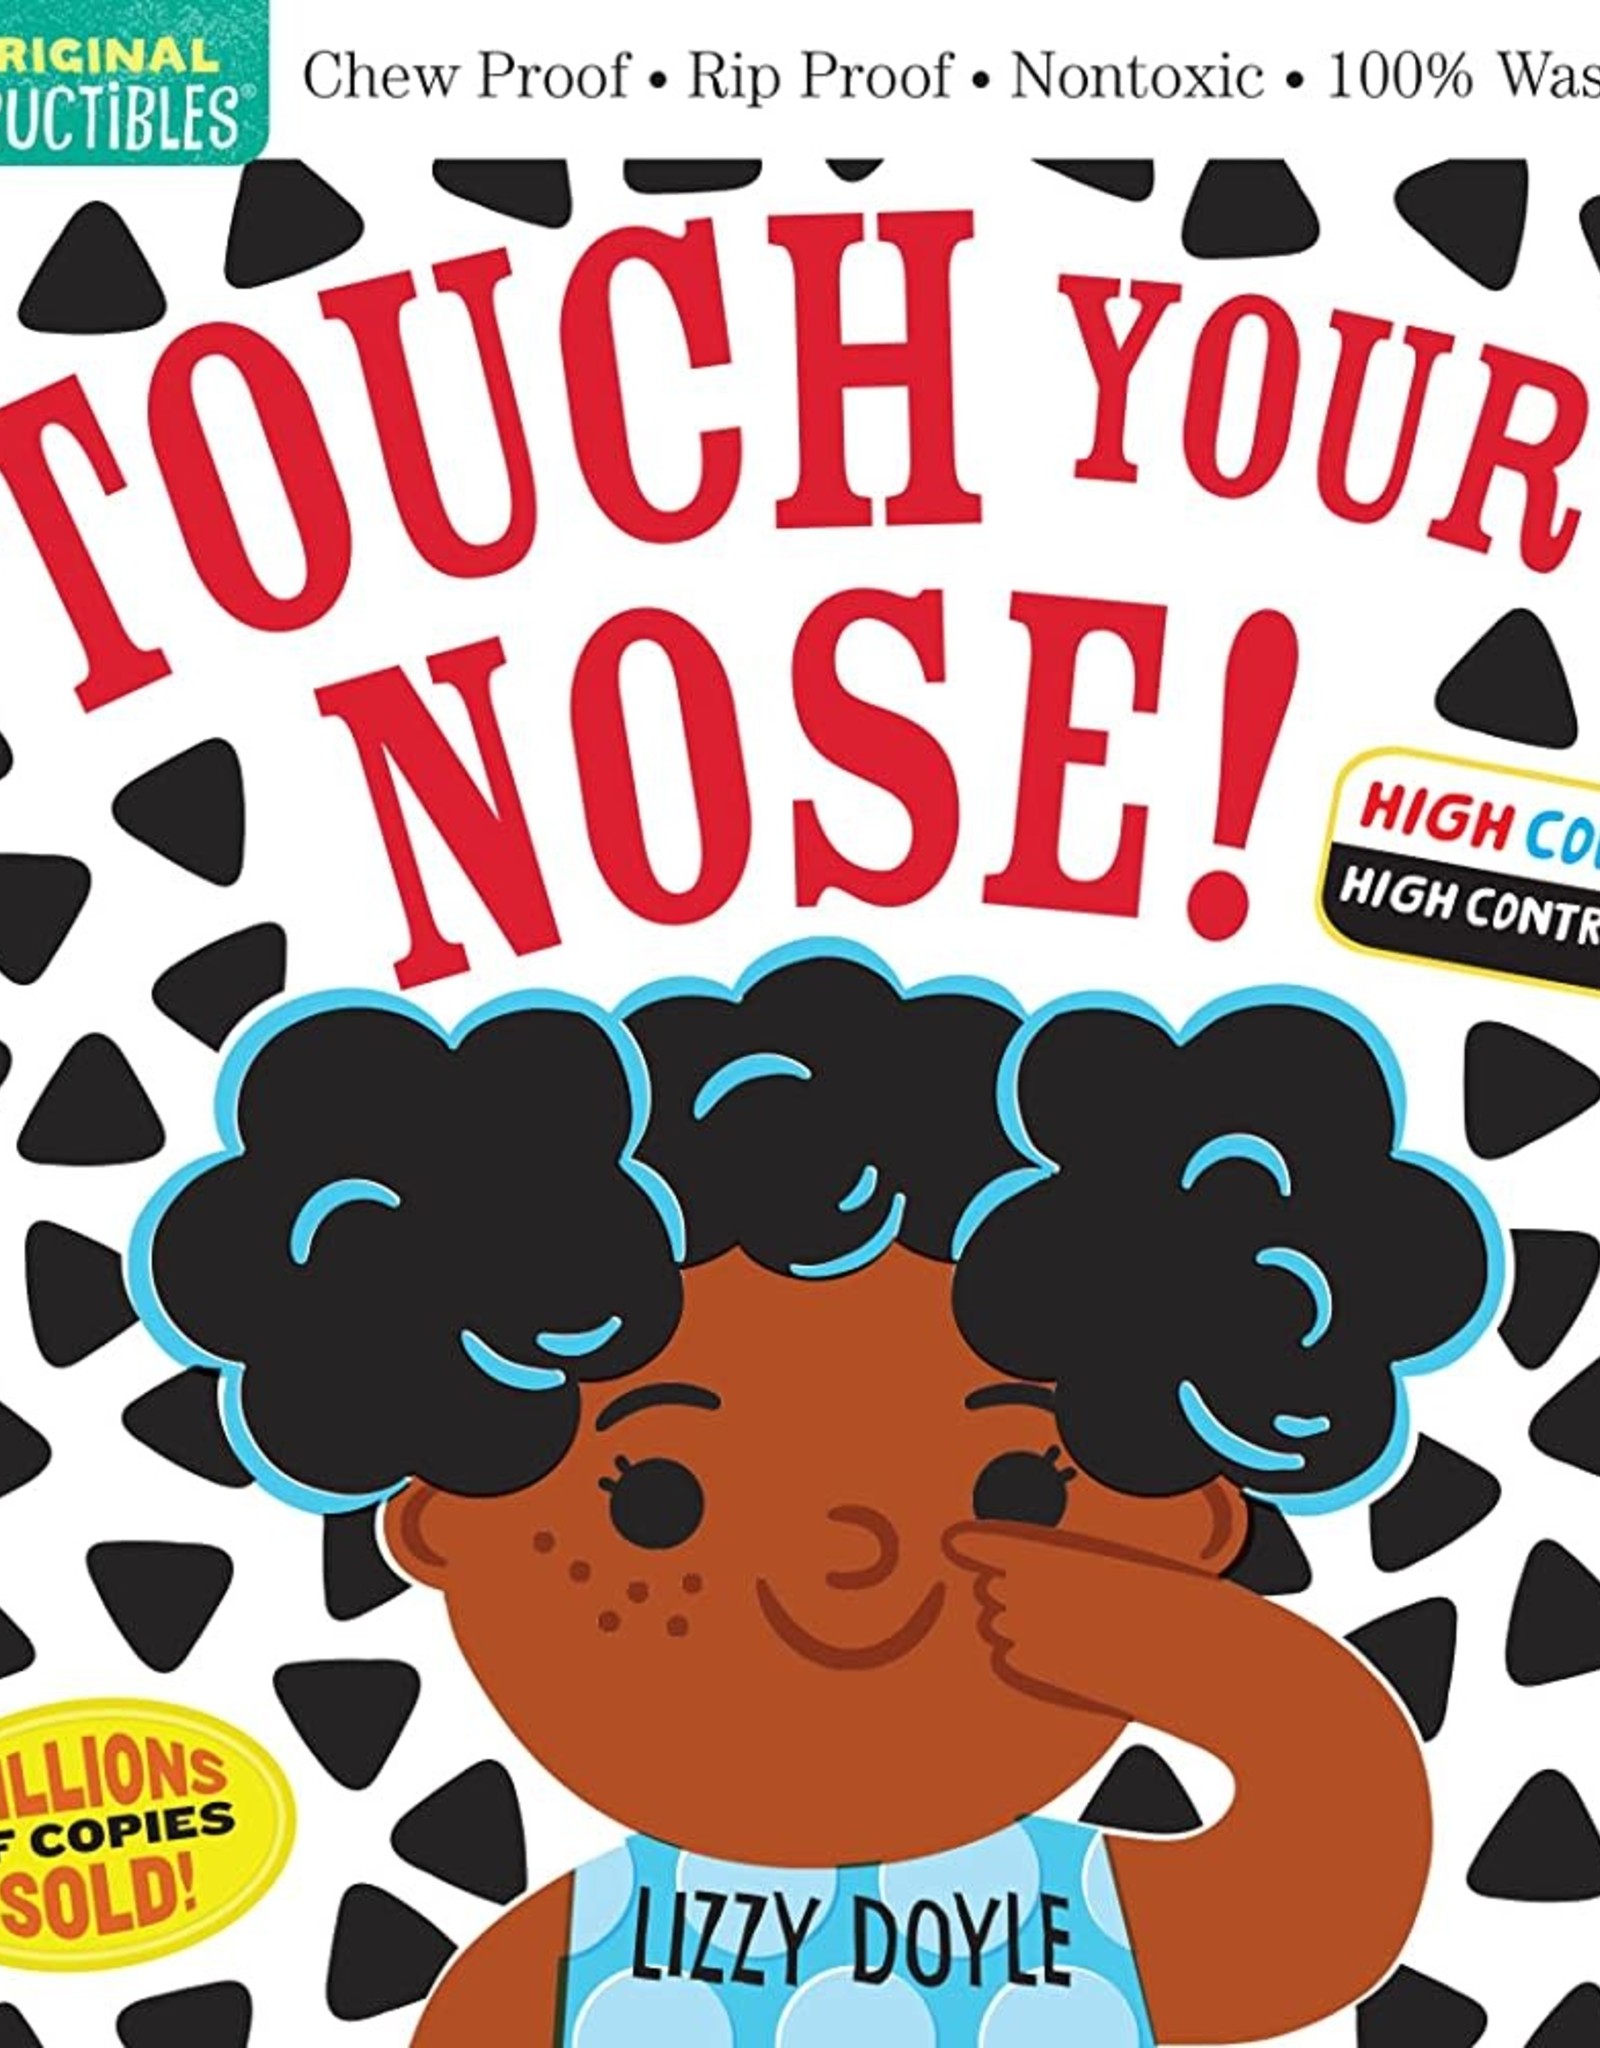 Indestrucibles Touch Your Nose!